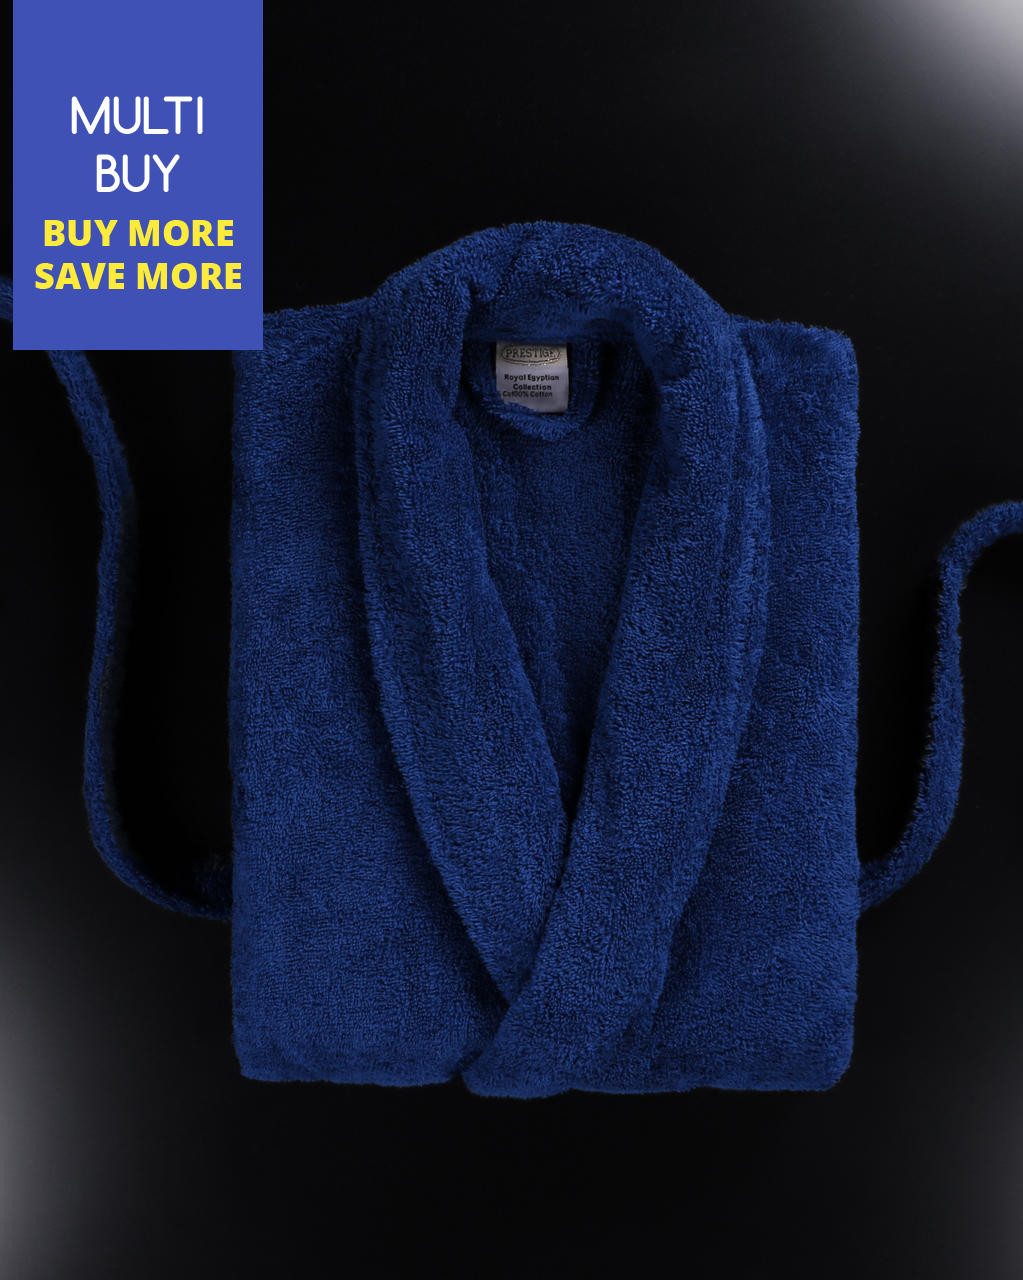 Low Cost Luxury Bath Robes With Price Promise Guarantee